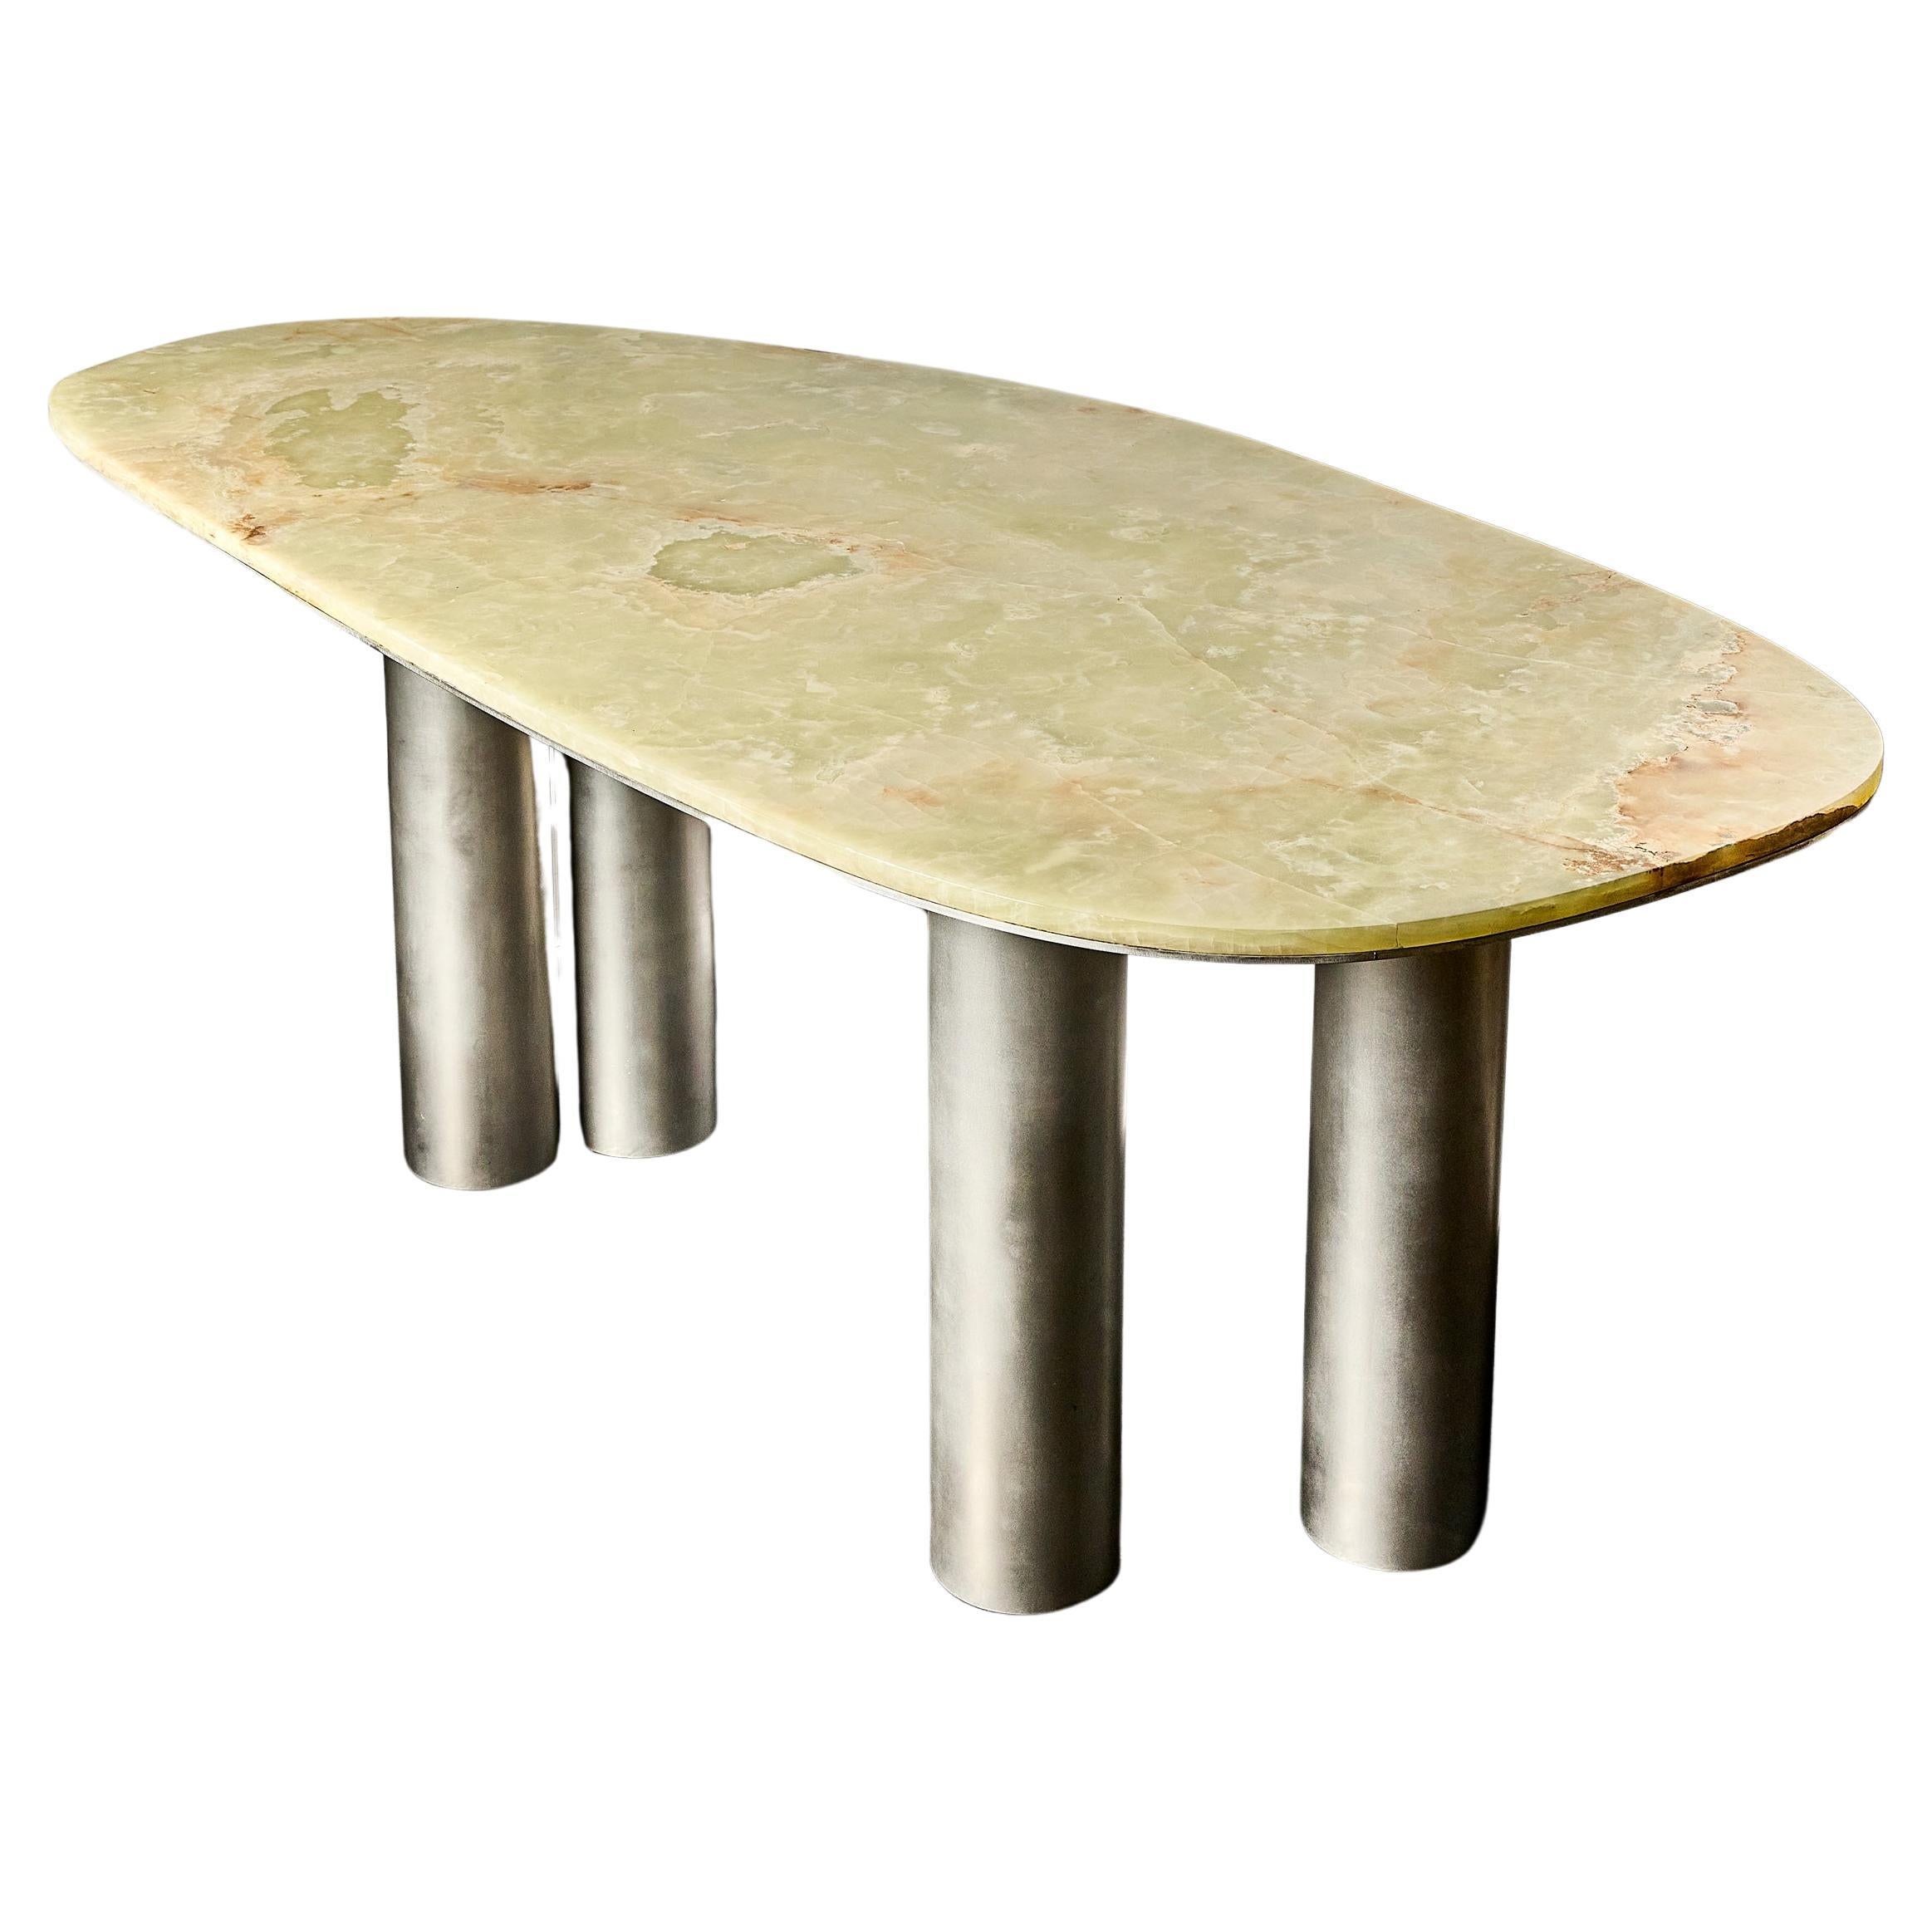 Green Onyx Desk with Brushed Aluminum or Brass Base For Sale